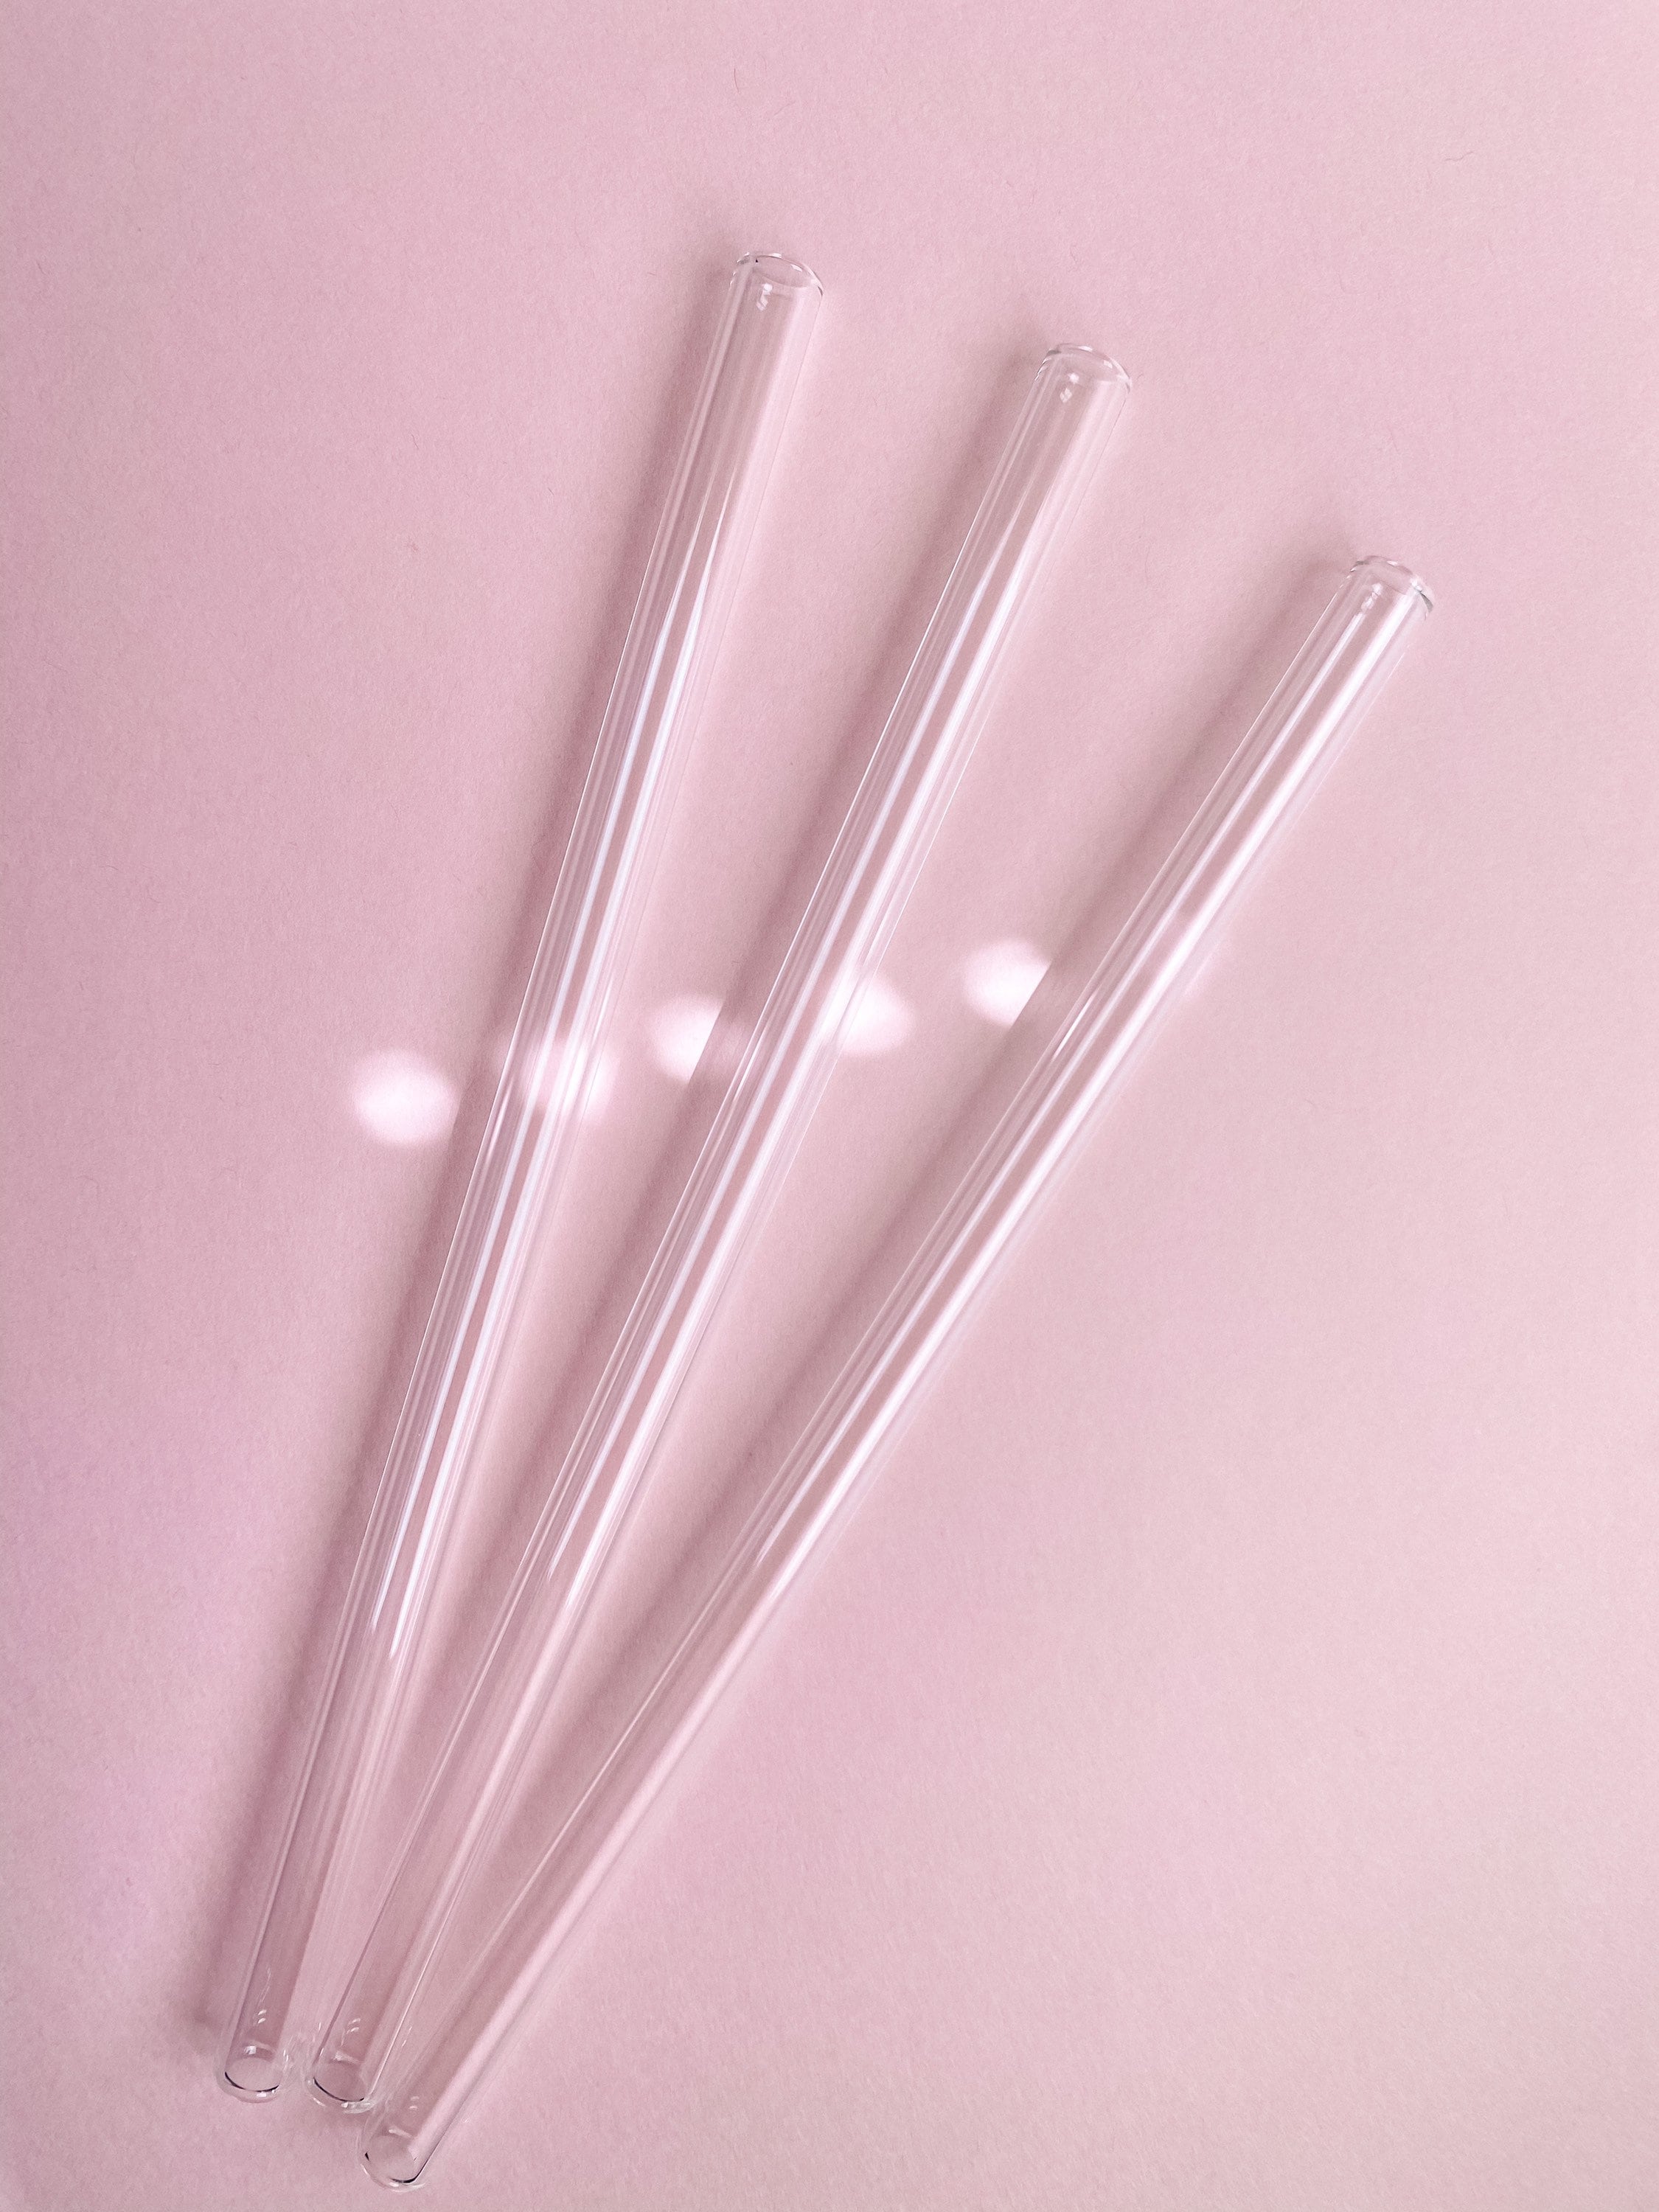 Clear Glass Straw for Glass Can 8x10mm Thick Reusable Straw for Glass Cups,  Beer Can, Clear Mug, Drink Accessories, Trendy Drinkware 